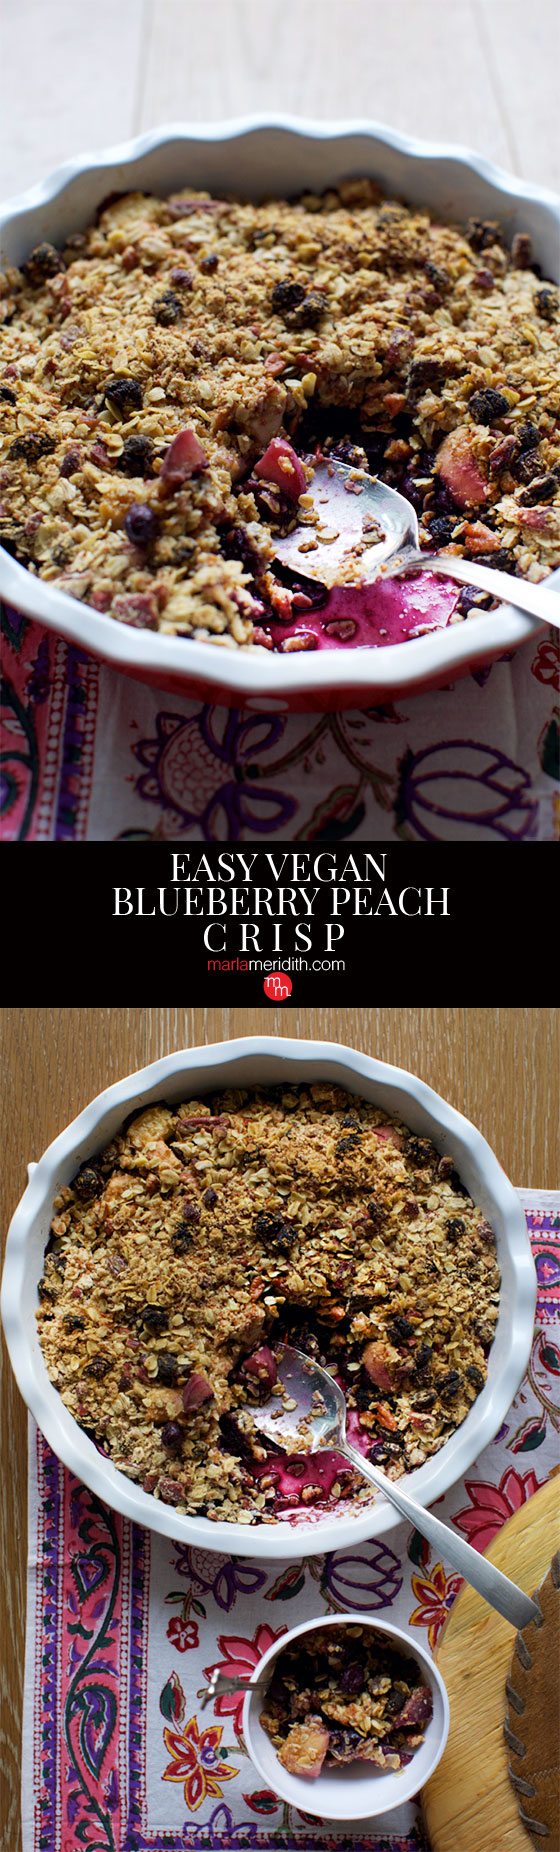 Easy Vegan Blueberry Peach Crisp #recipe Use the freshest summer fruits in this healthy dessert! MarlaMeridith.com ( @marlameridith )